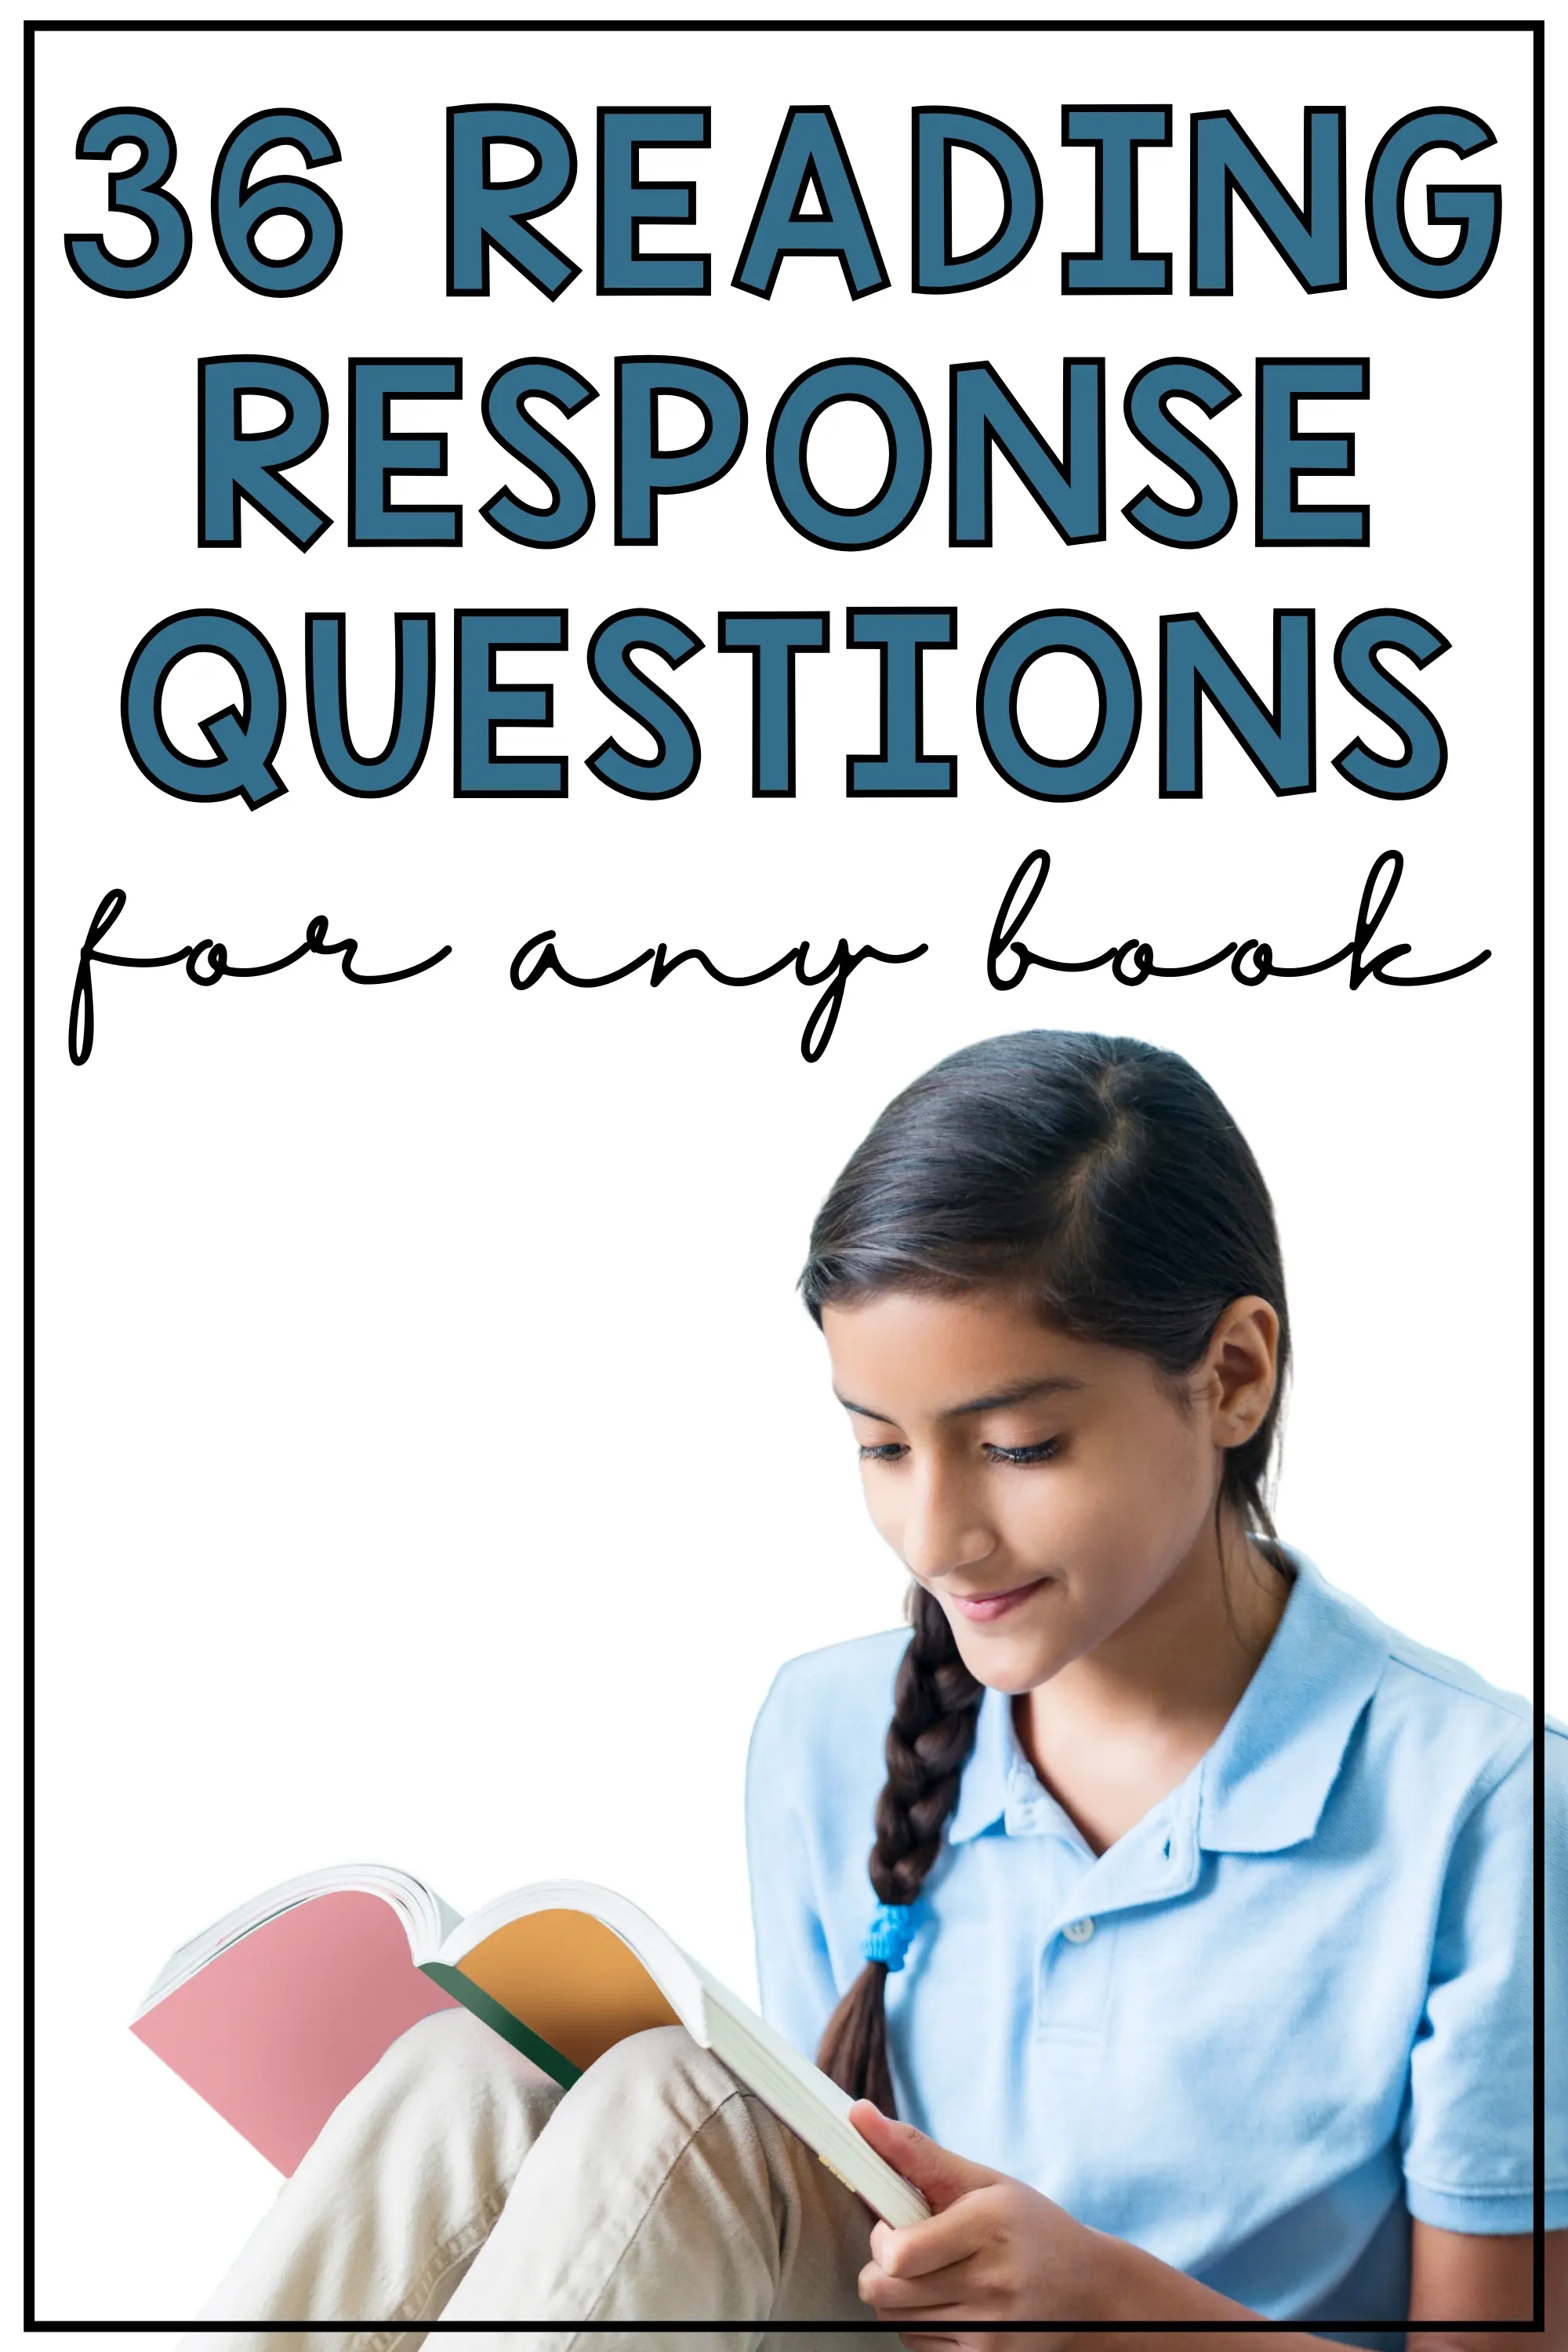 Reading Response Questions for Any Fiction Book